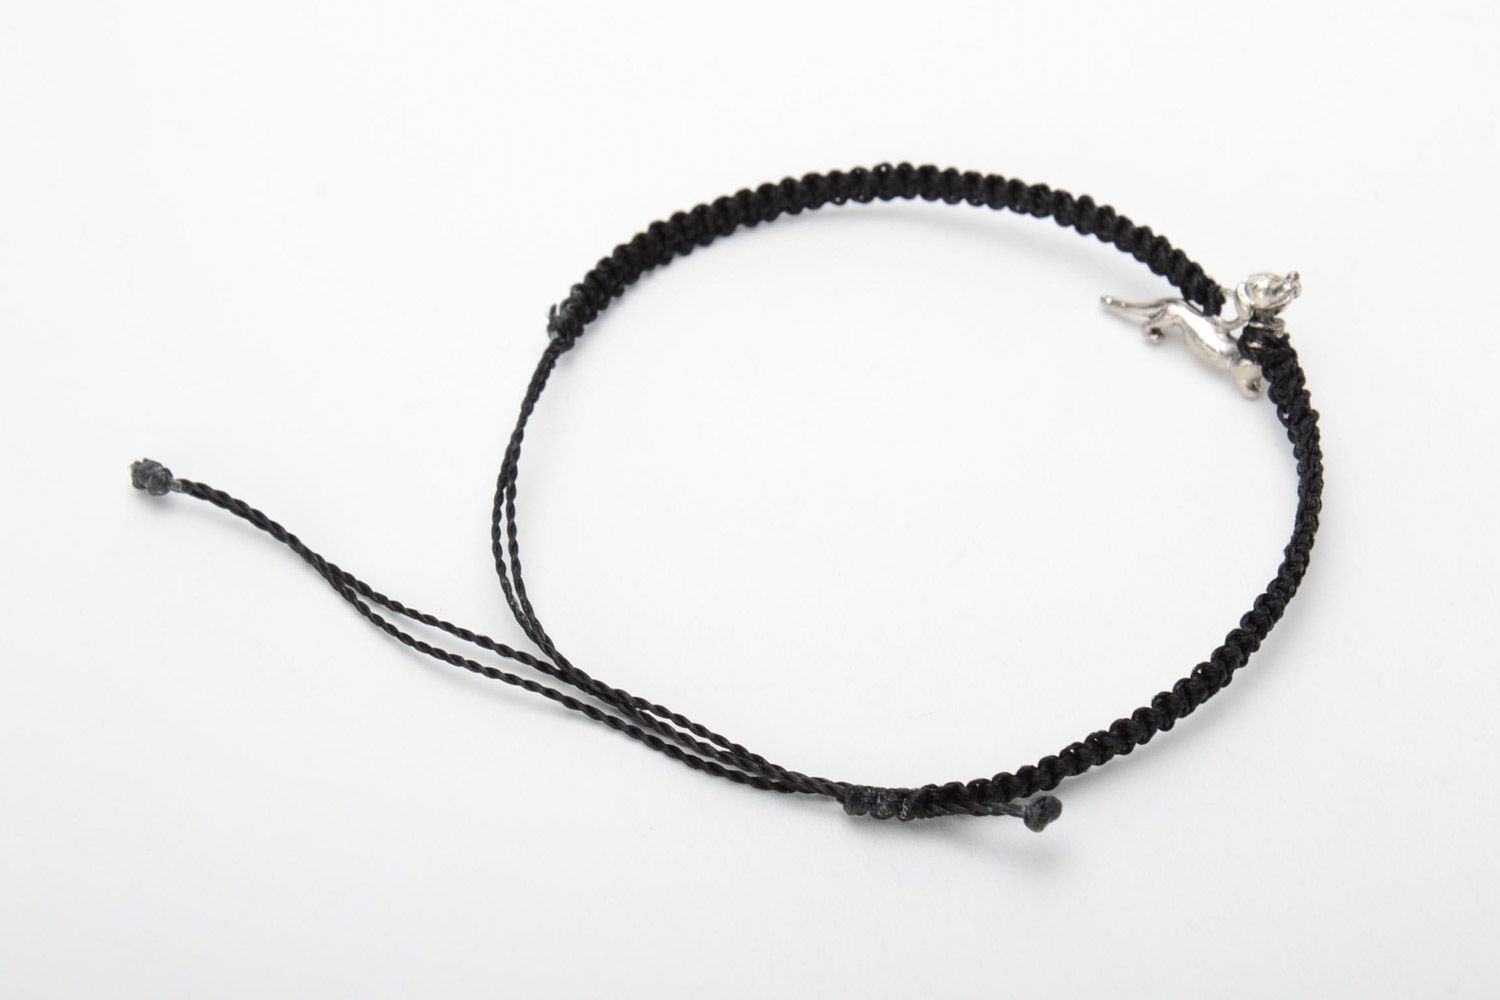 Handmade friendship bracelet woven of gray threads with a badger-dog charm photo 4